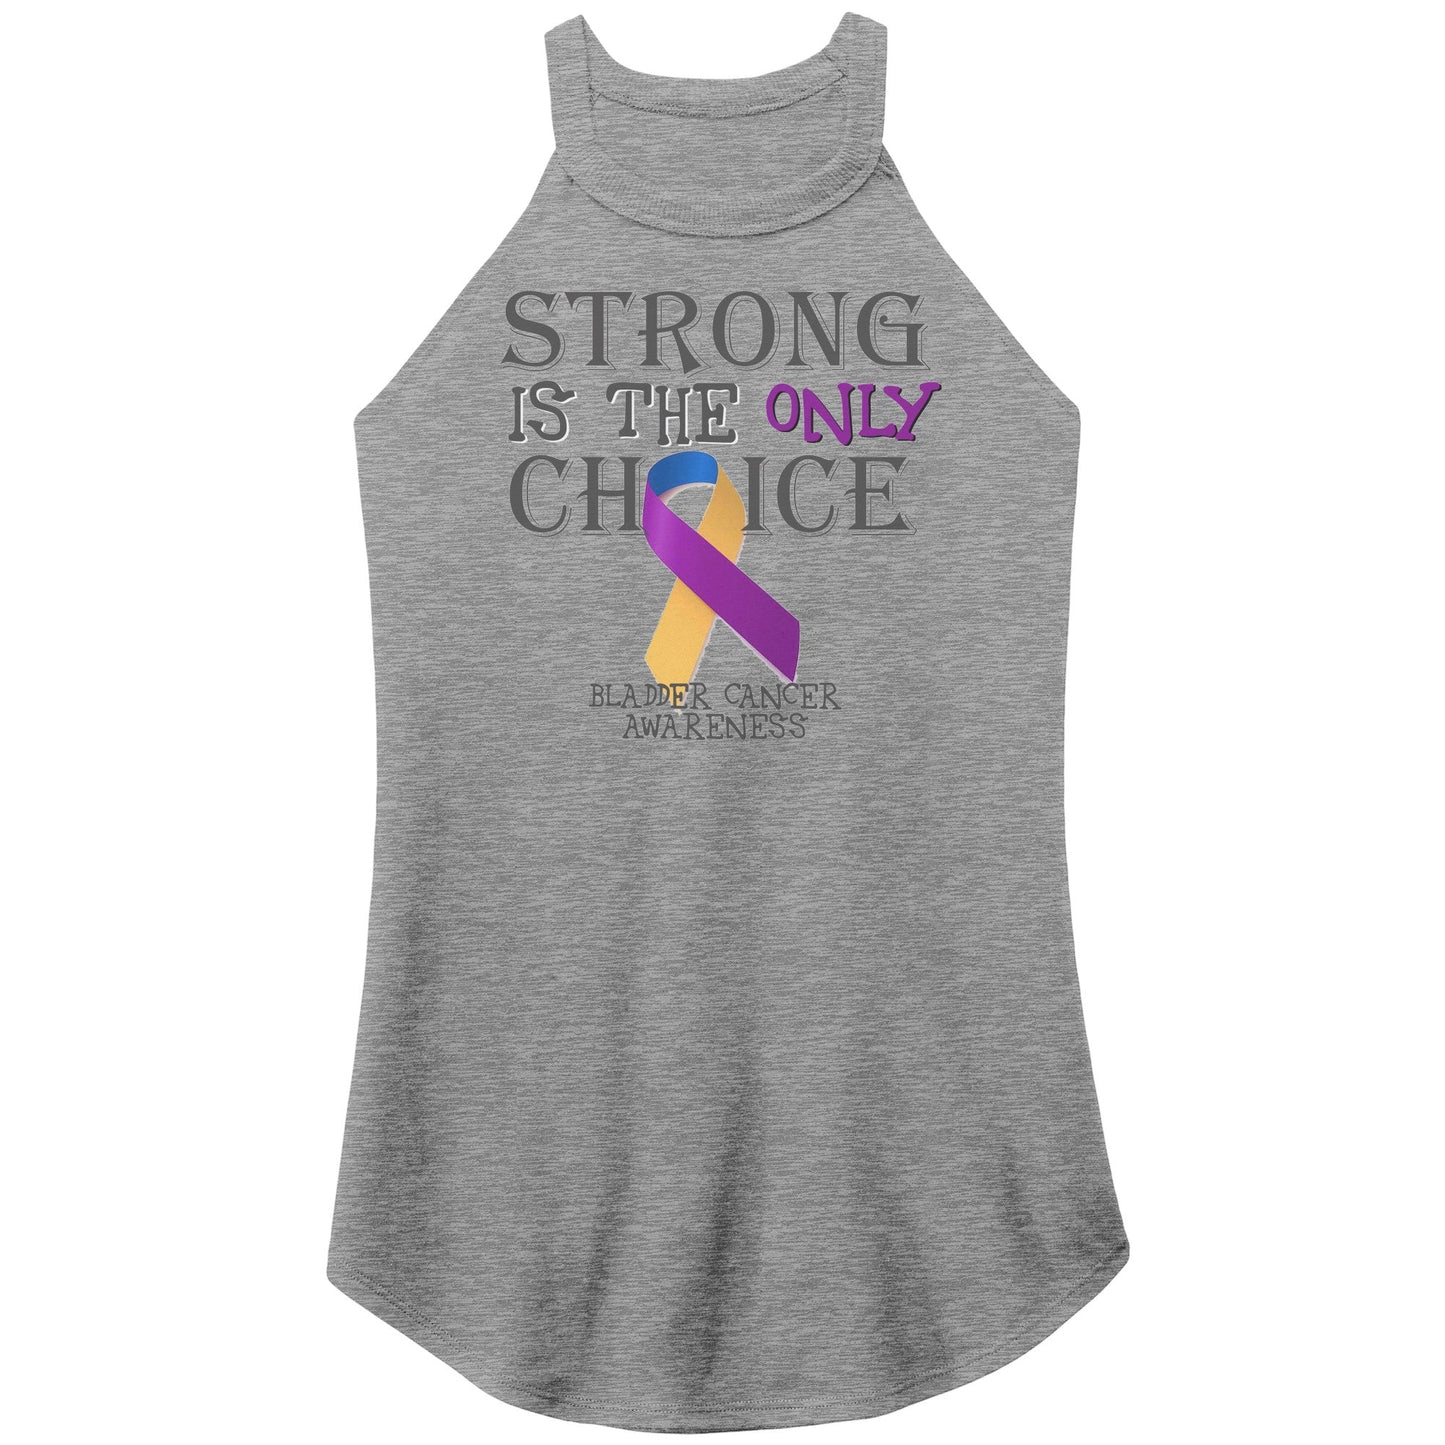 Strong is the Only Choice -Bladder Cancer Awareness T-Shirt, Hoodie, Tank |x|